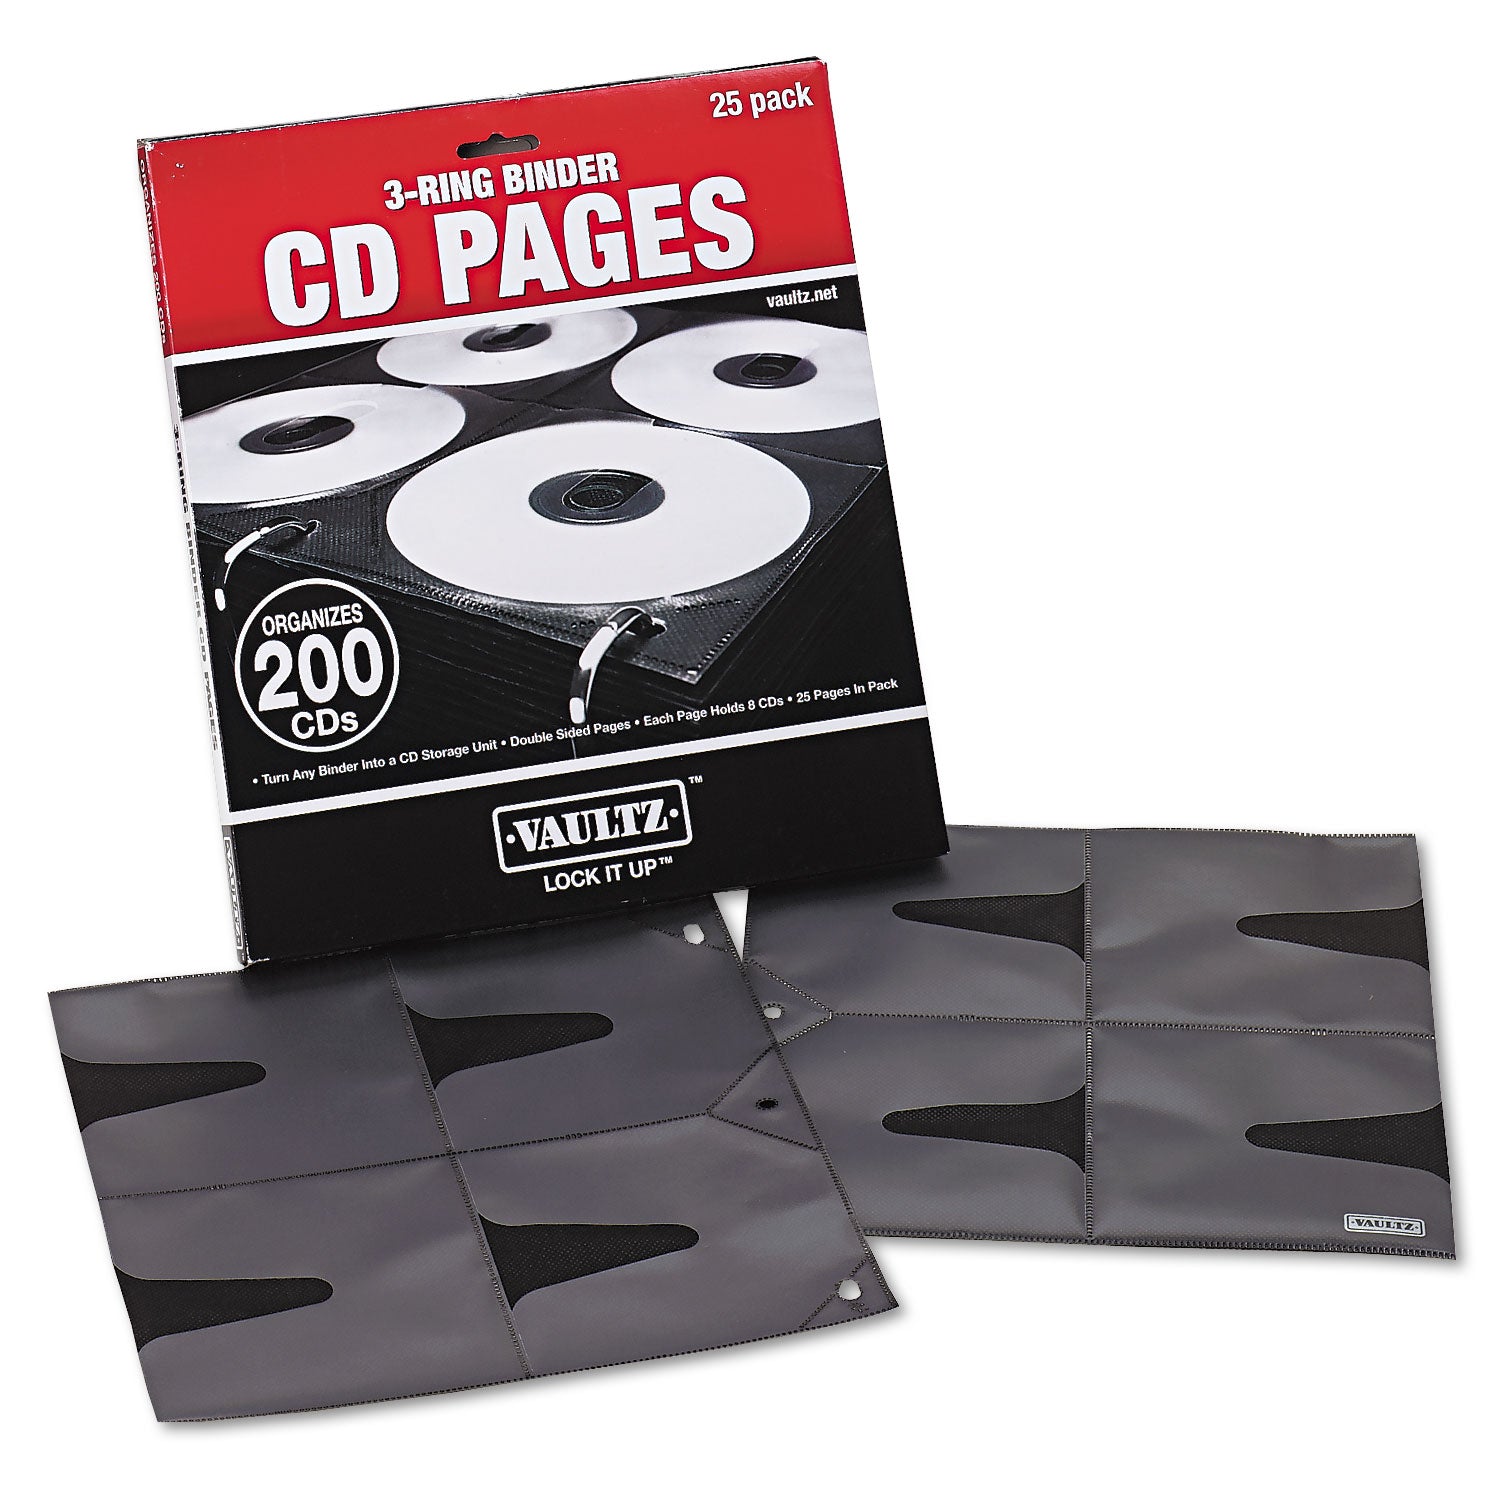 Two-Sided CD Refill Pages for Three-Ring Binder, 8 Disc Capacity, Clear/Black, 25/Pack - 